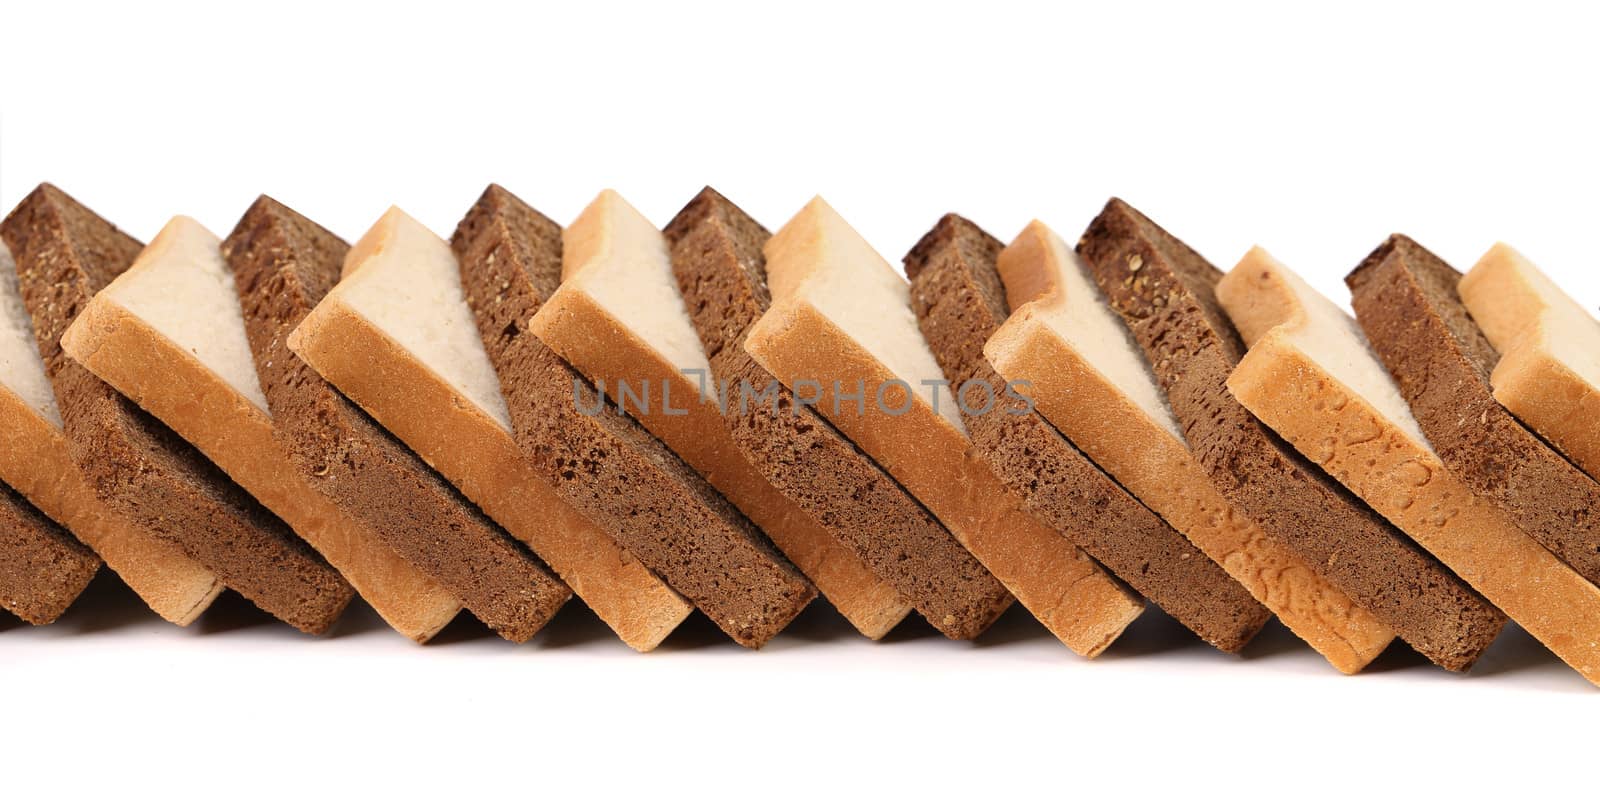 Row of sliced bread. White and black. Isolated on a white background.